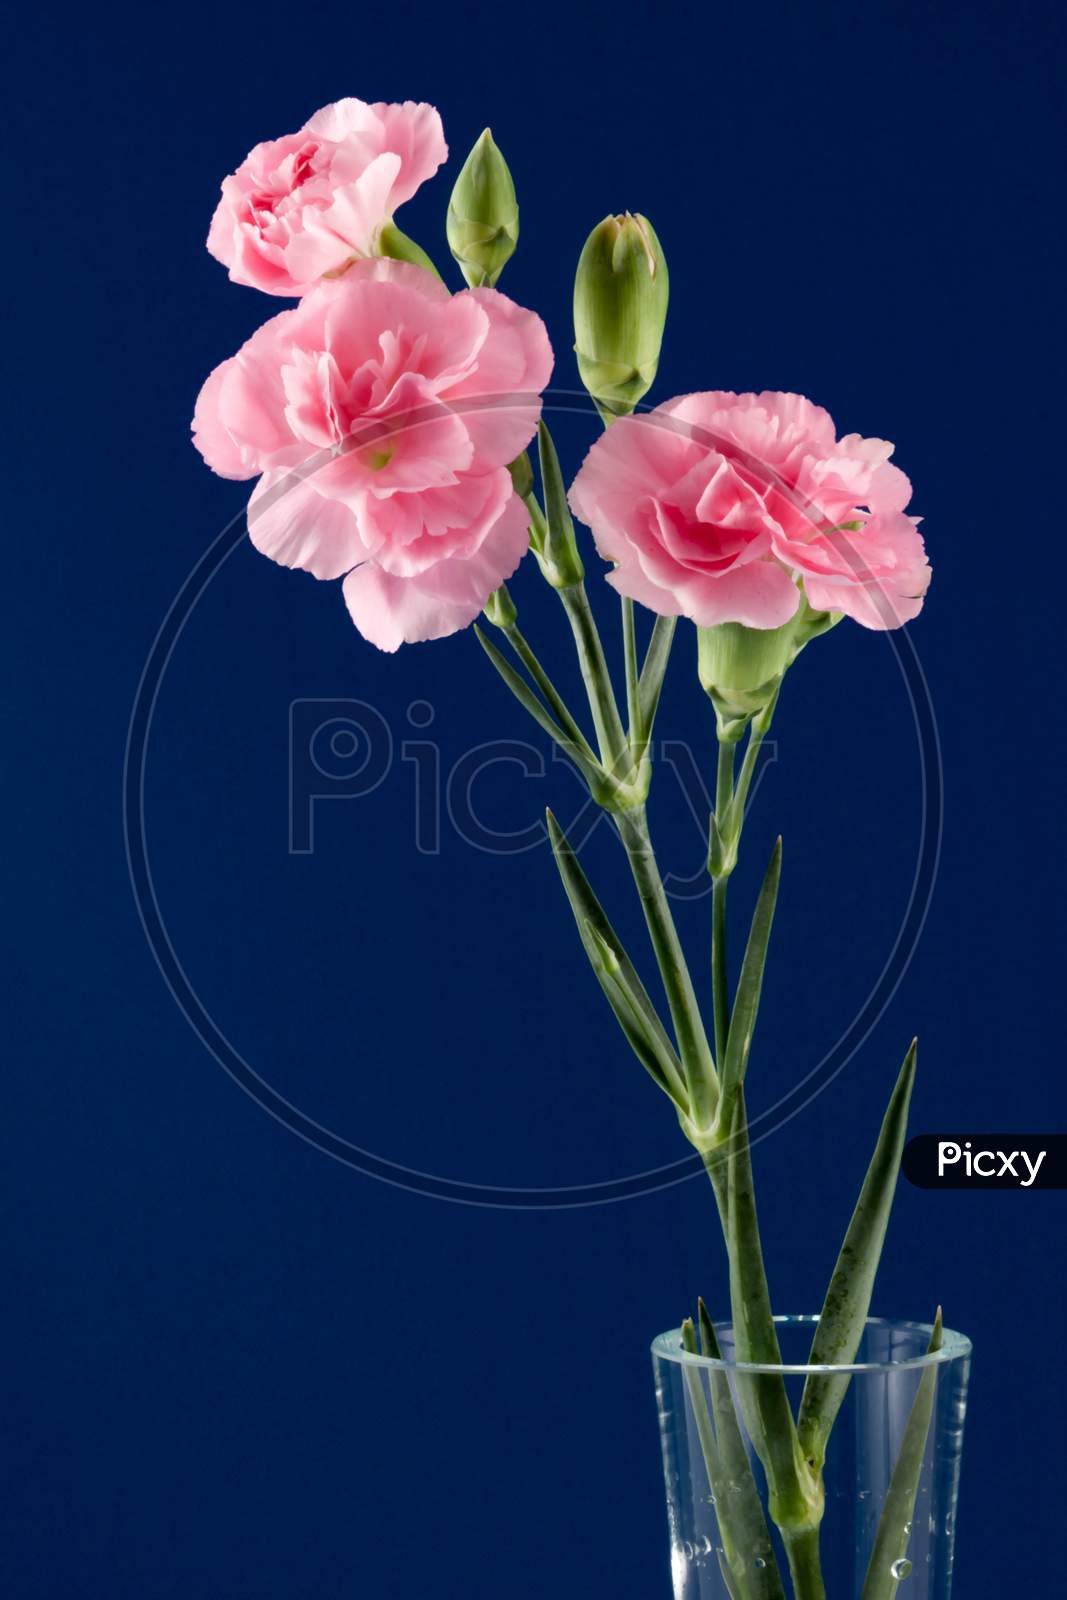 Display Of A Small Group Of Pinks